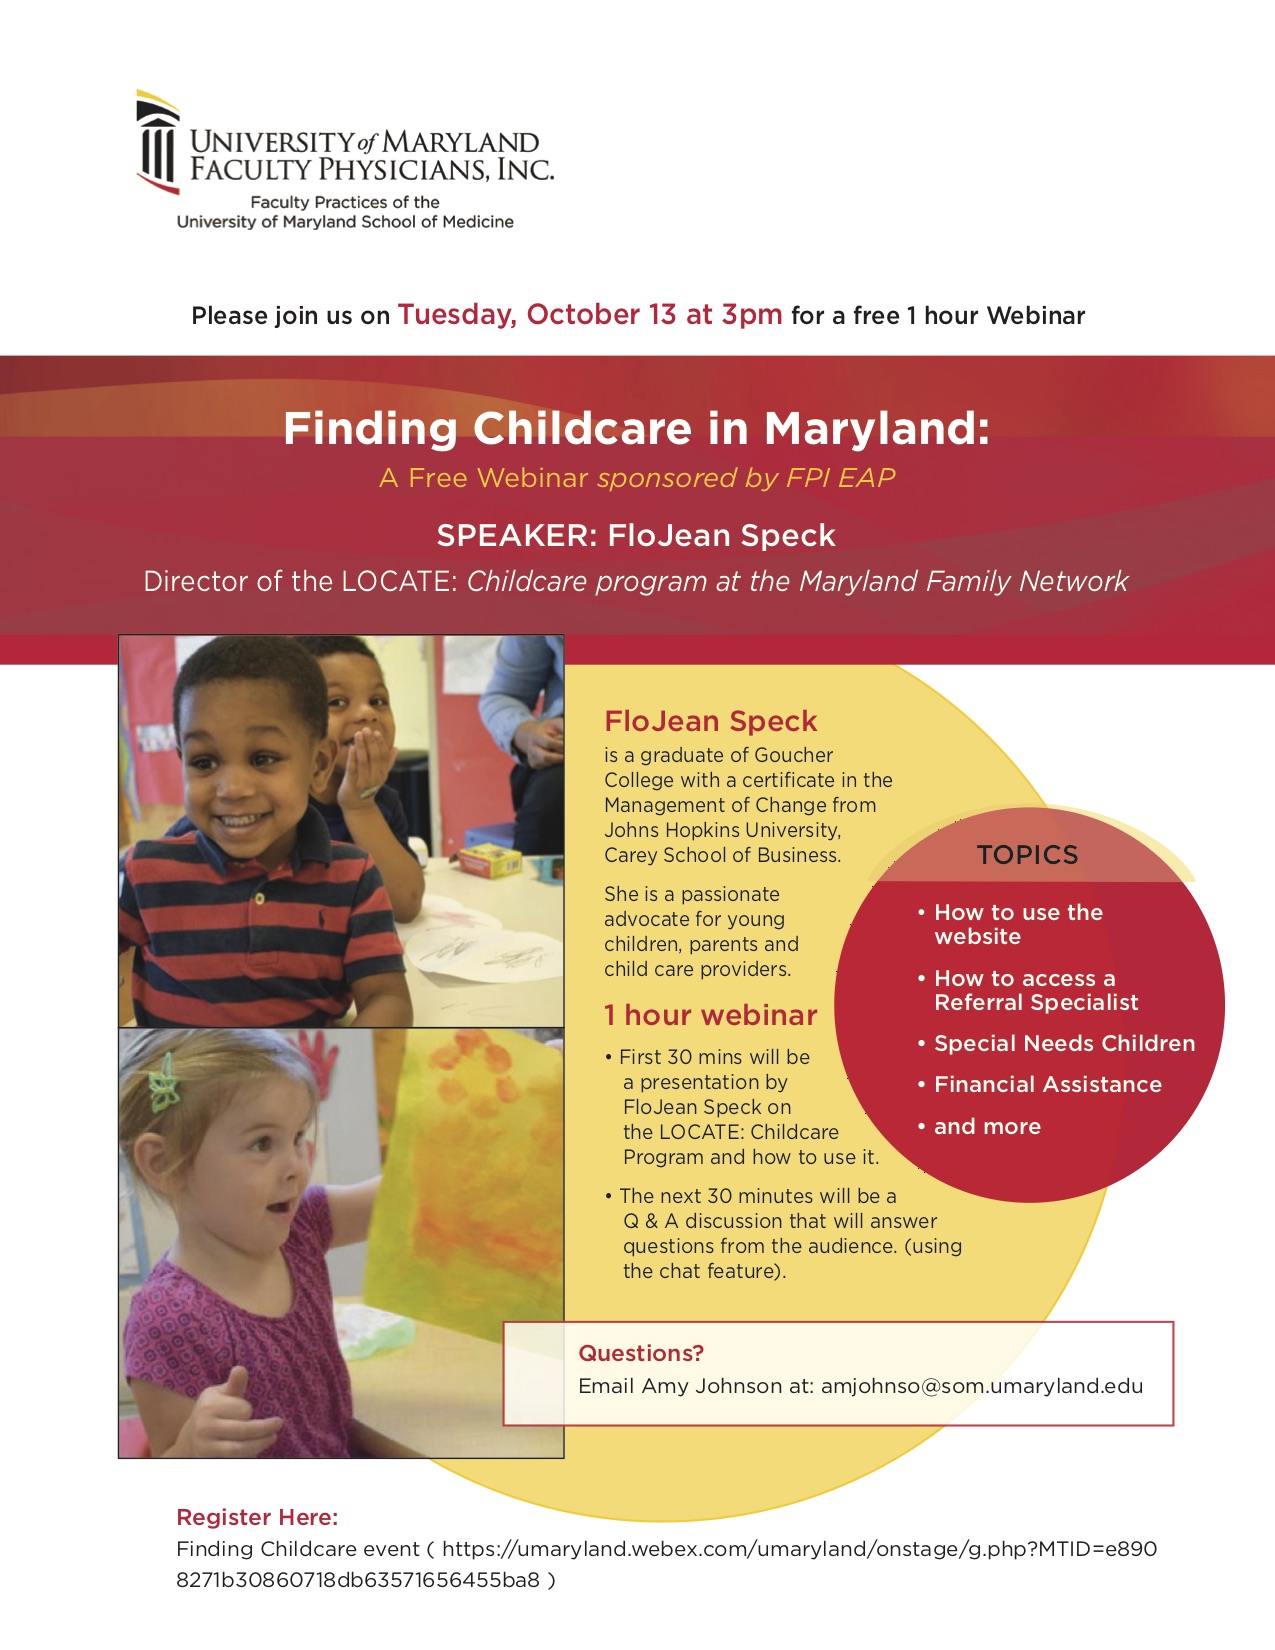 Finding Childcare in Maryland